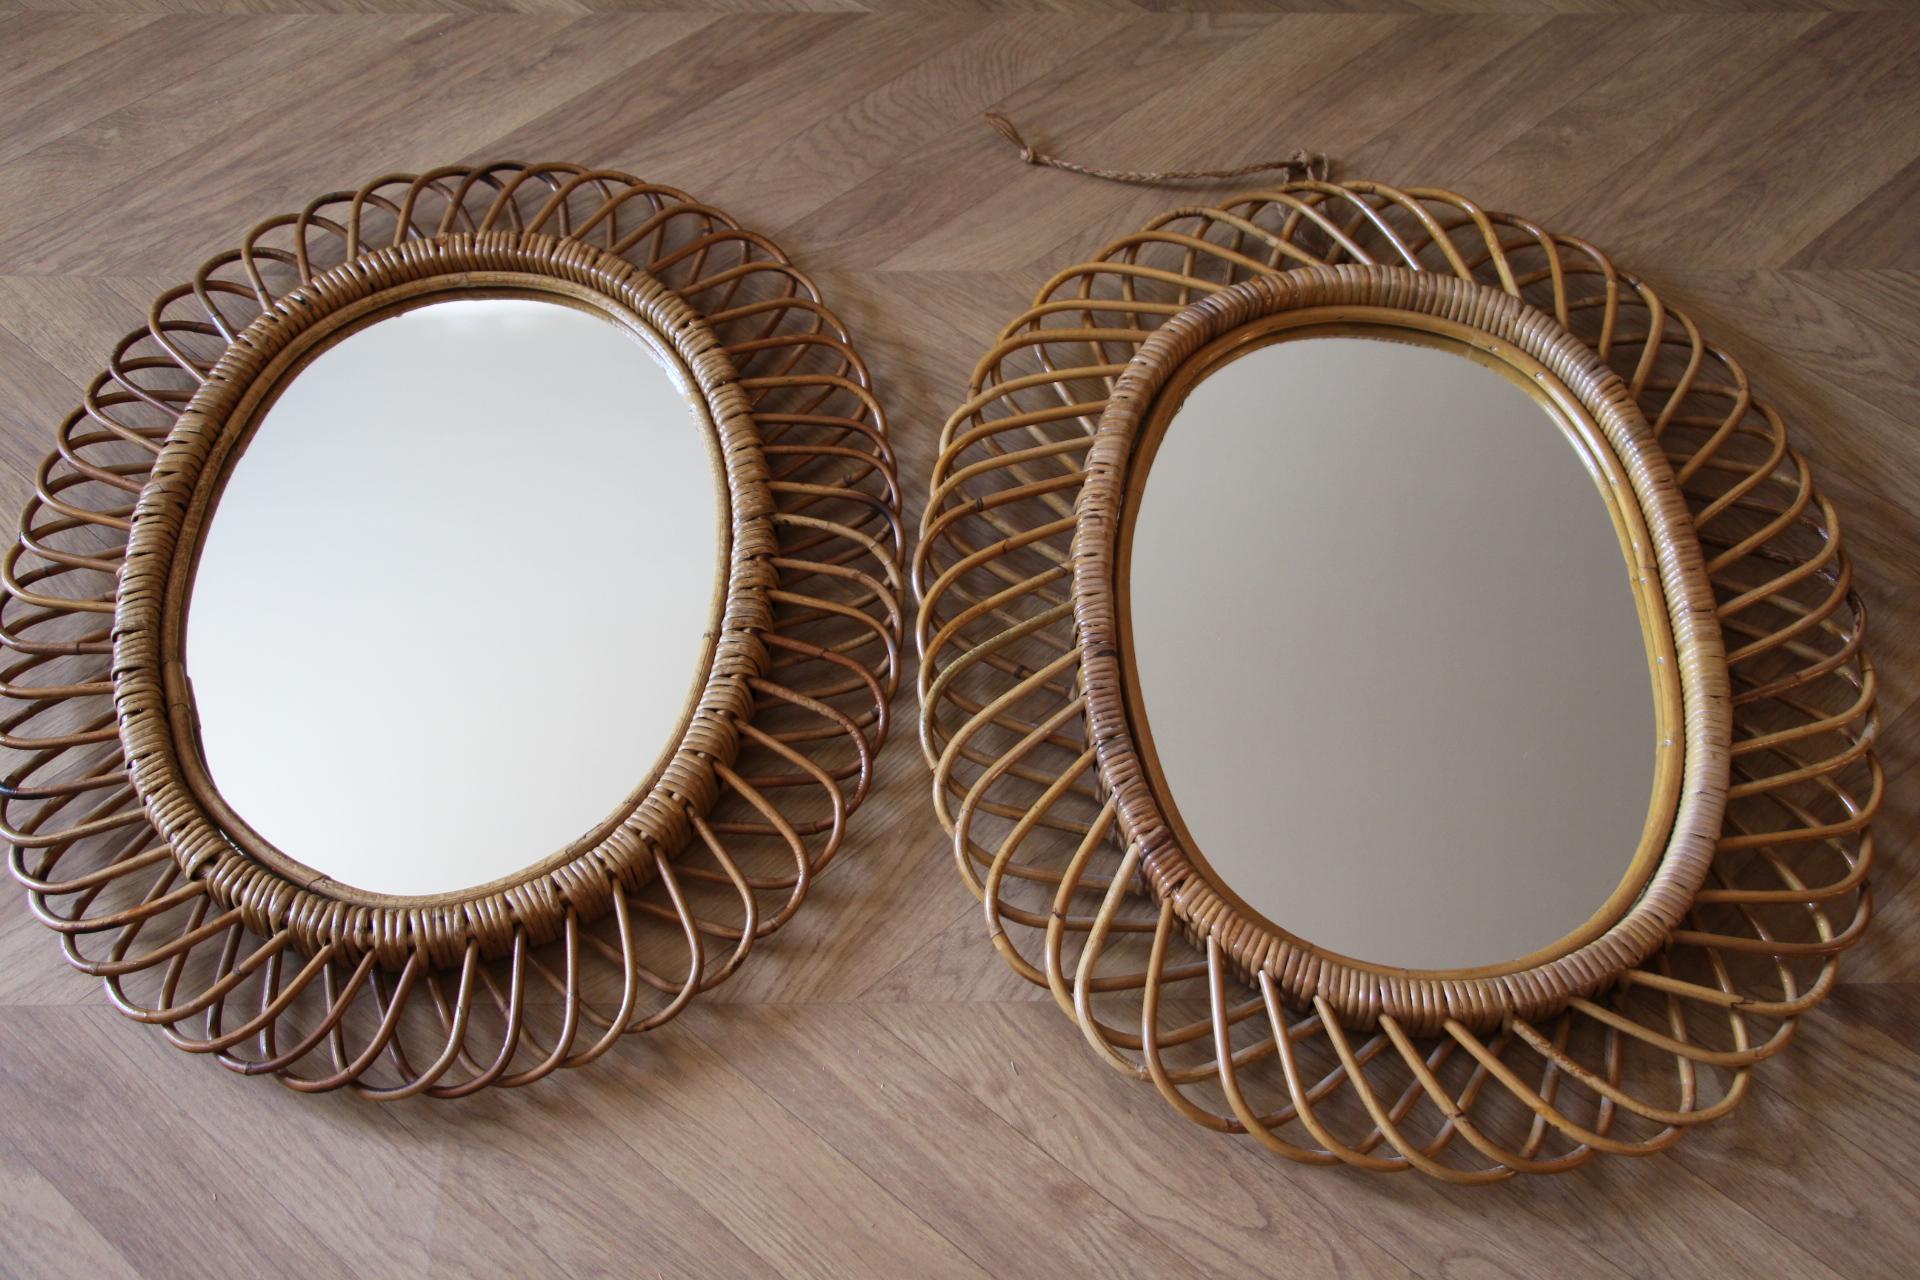 Pair of Vintage 1960s Rattan and Bamboo Round Wall Mirror by Franco Albini For Sale 3